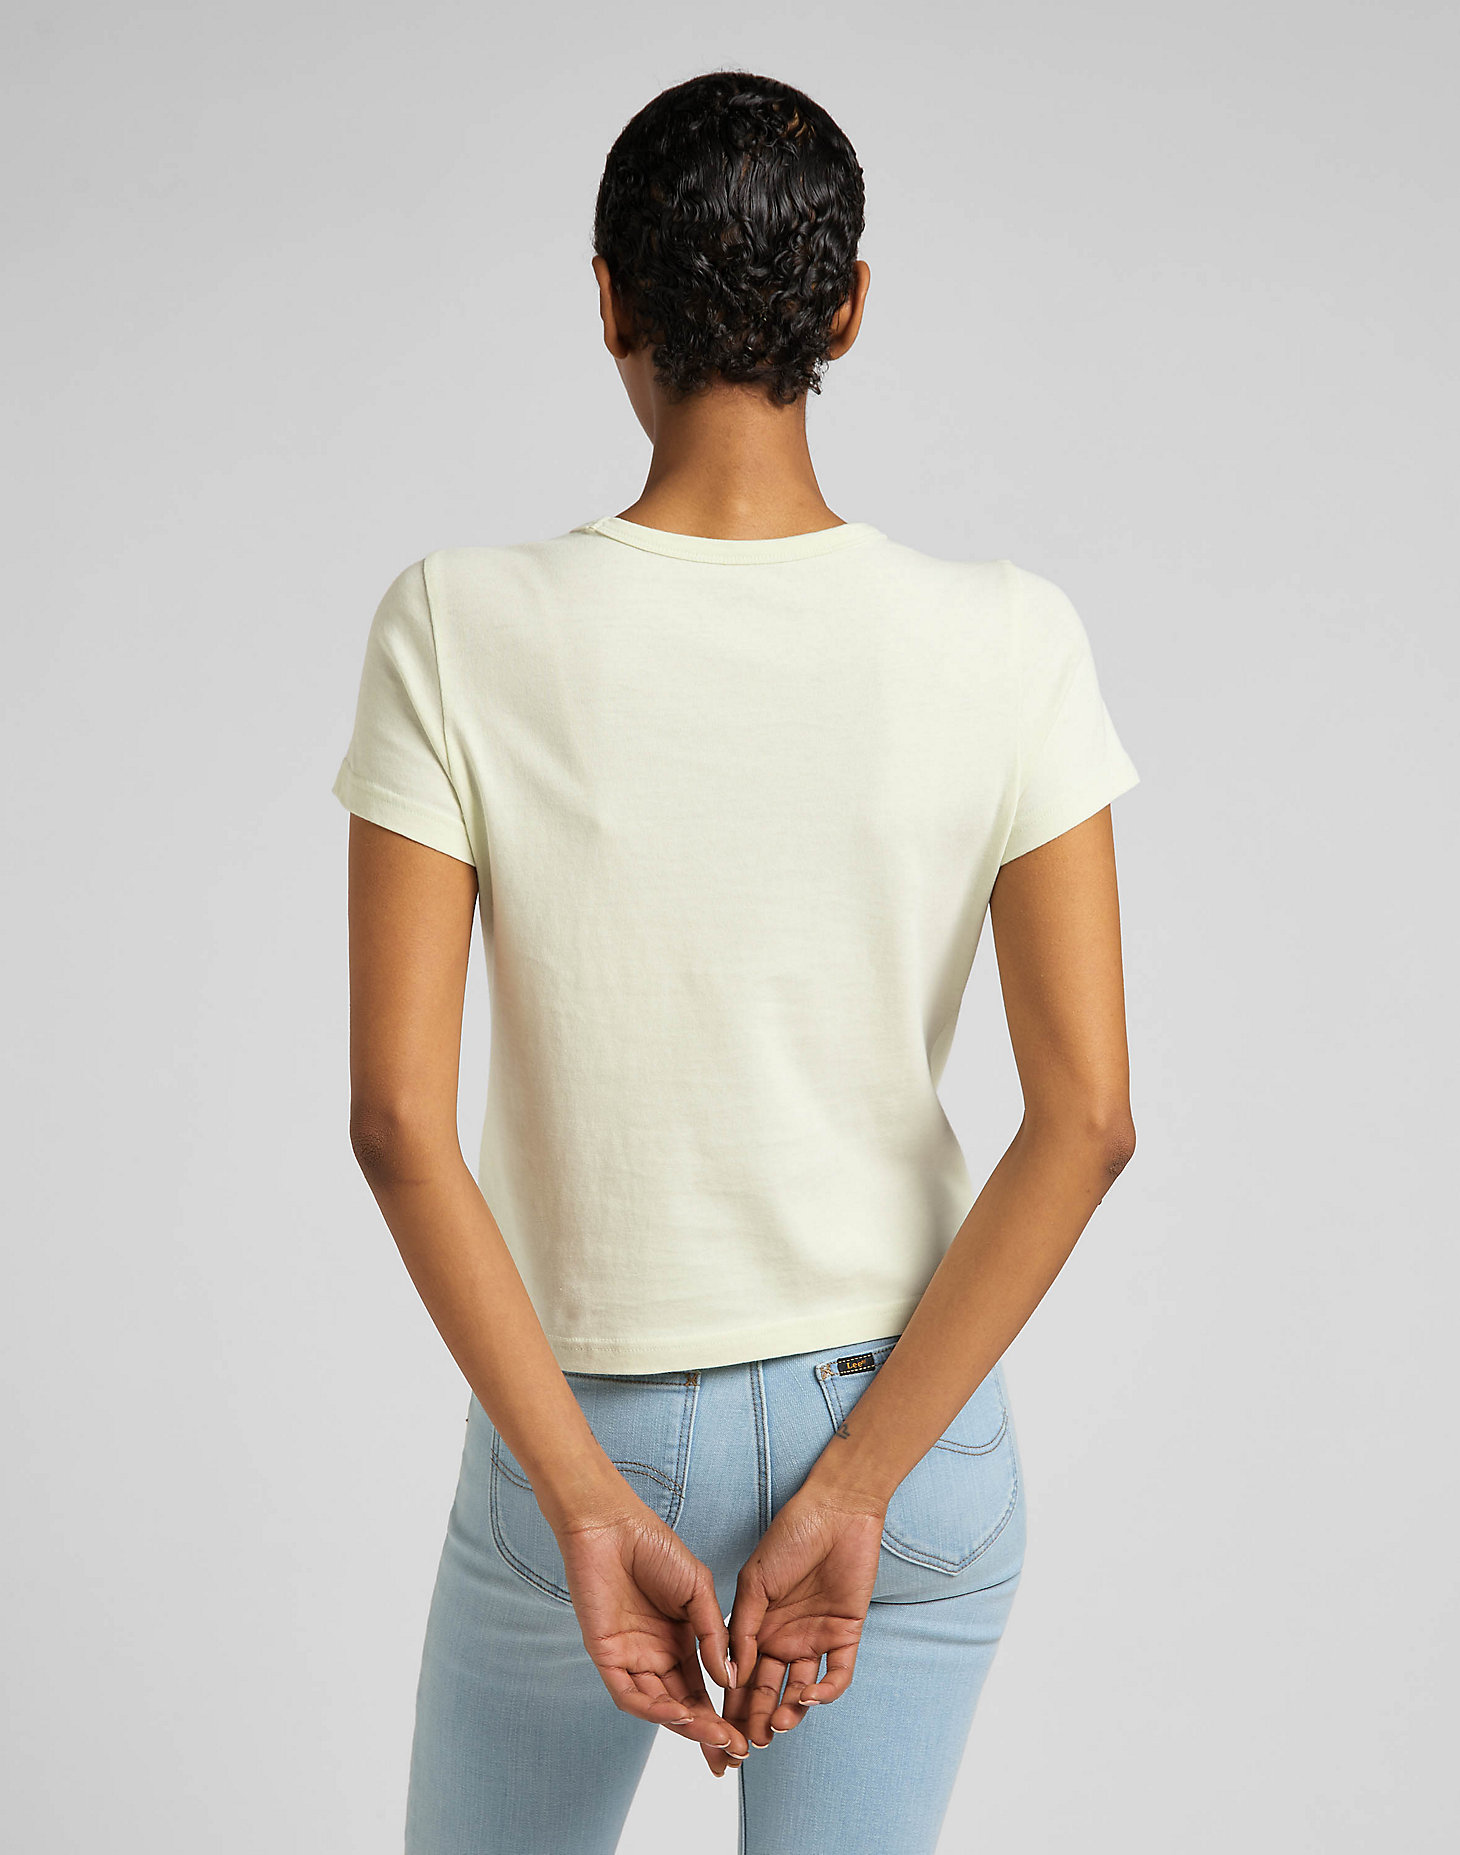 Slim Cropped Tee in Canary Green alternative view 1